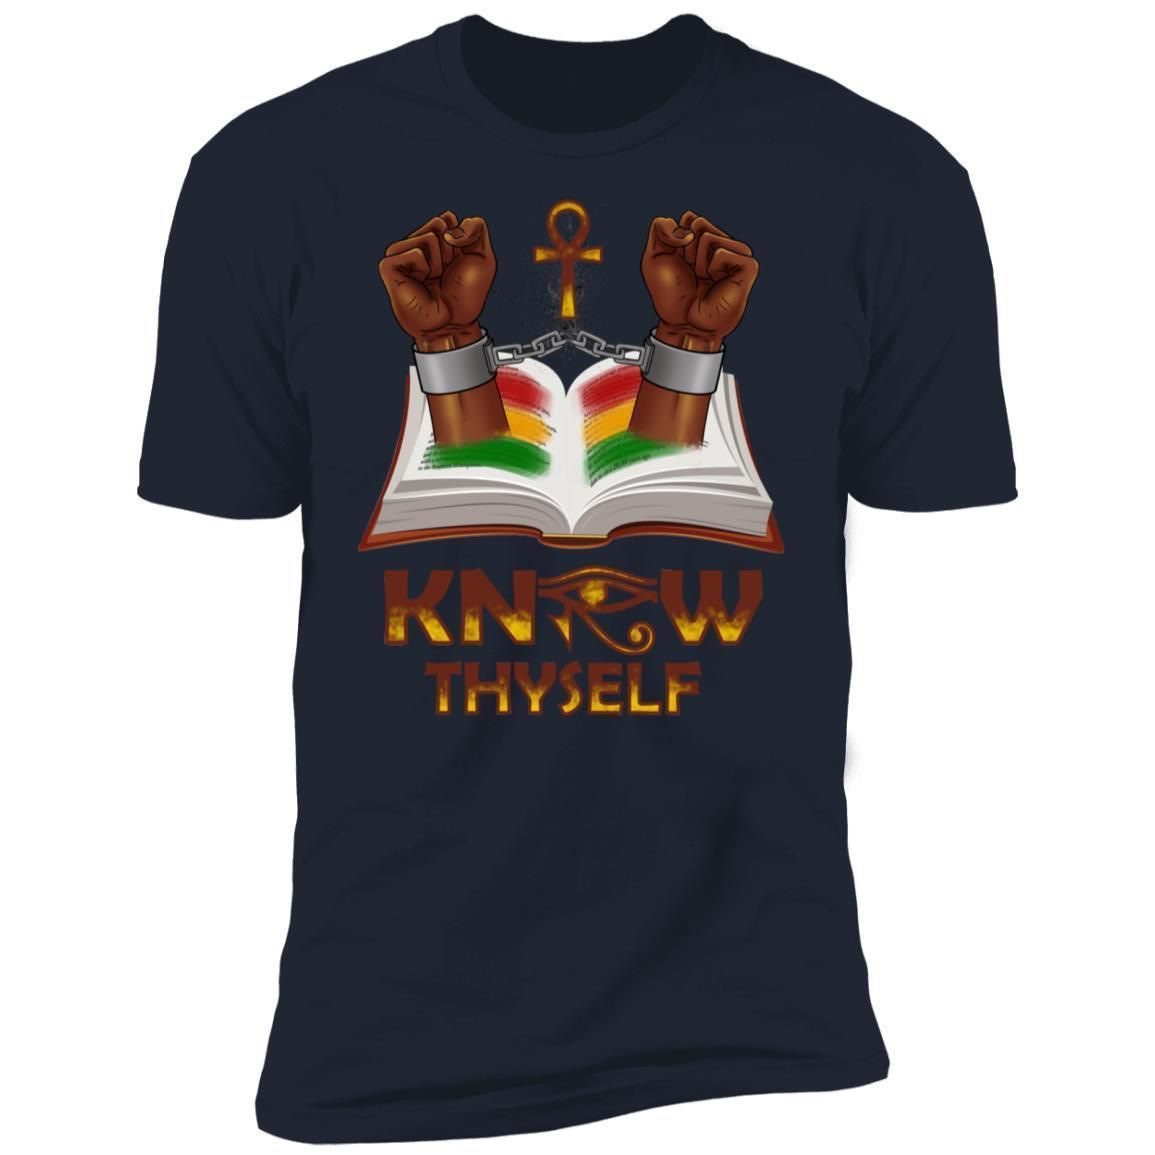 Know Thy Self T-shirt